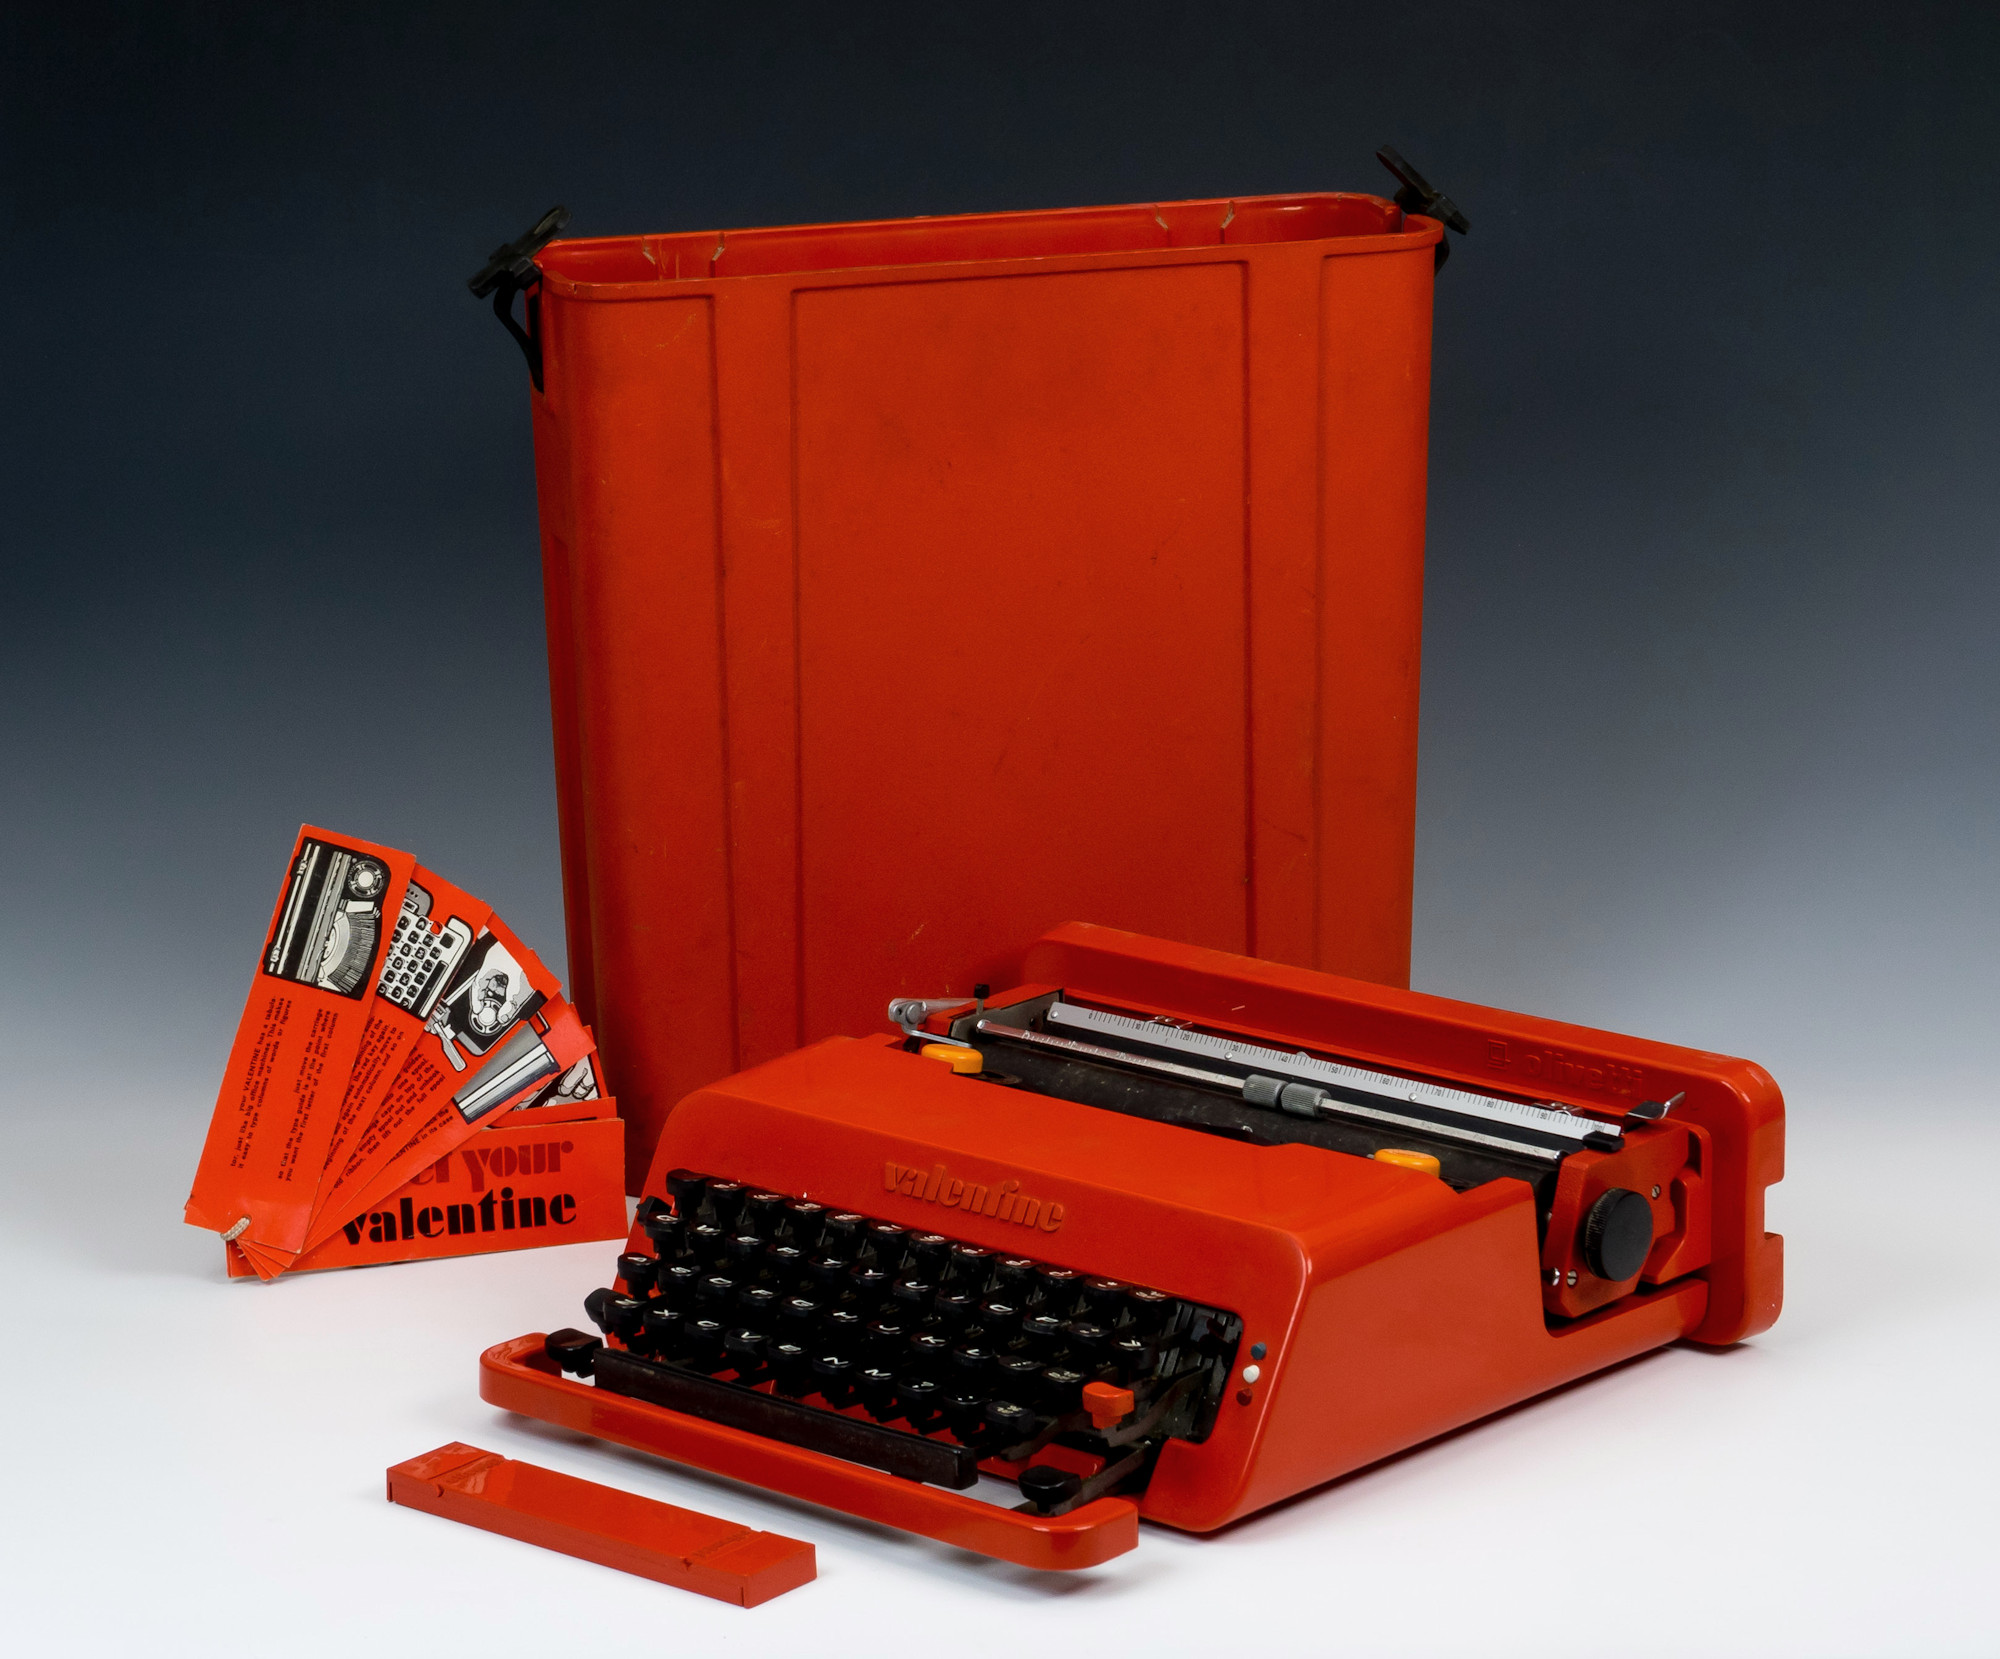 Italian Valentine portable typewriter designed by Ettore Sottsass for Olivetti, 1969, with red